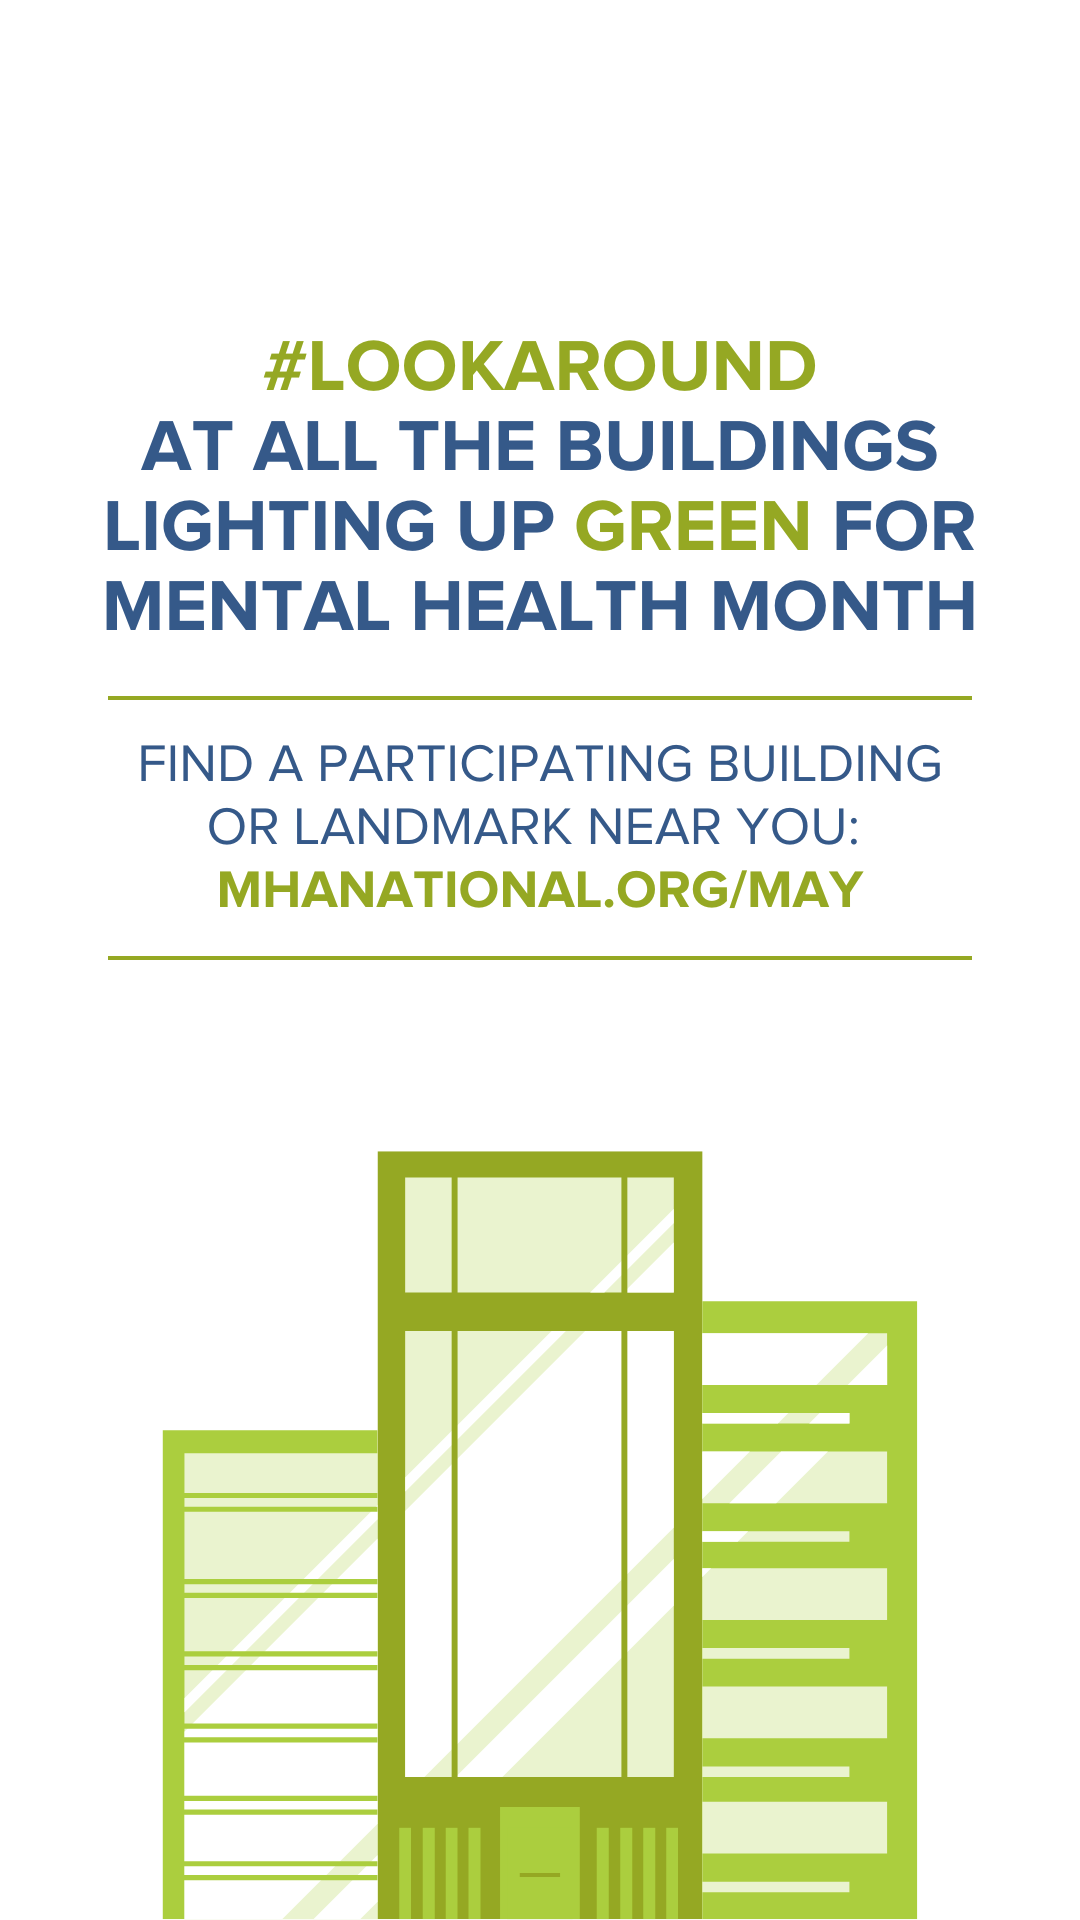 #LookAround at all the buildings lighting up green for Mental Health Month | Find a participating building or landmark near you: mhanational.org/may